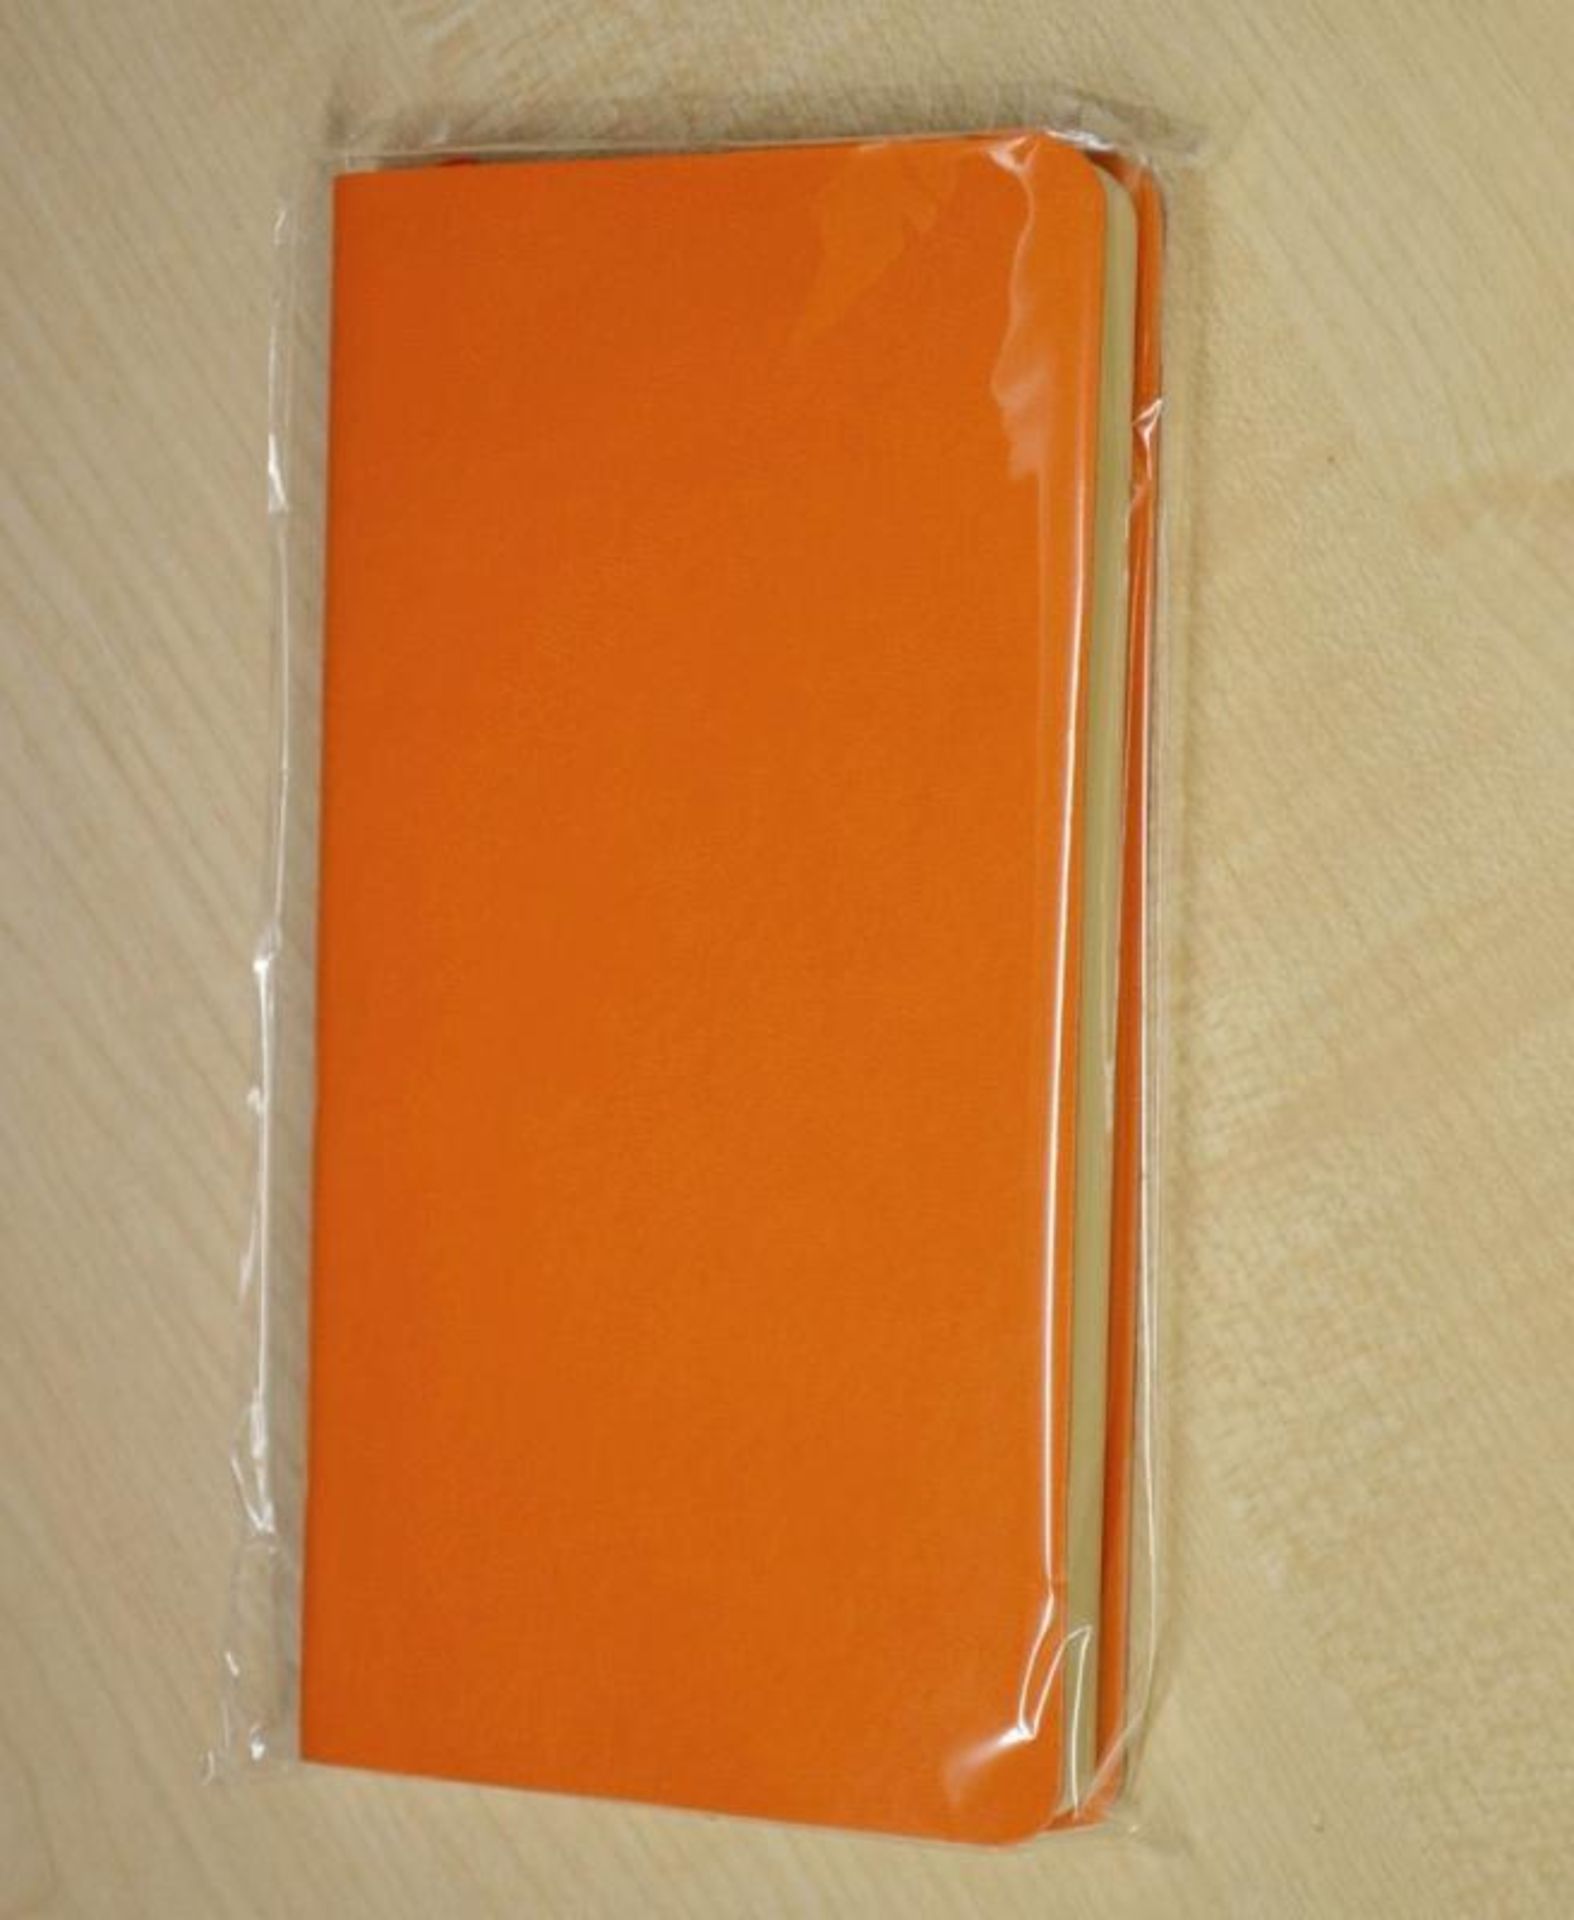 25 x ICE LONDON "Slim" Faux Leather Covered Notebooks In Bright Orange - Dimensions: 17.7 x 10cm - B - Image 2 of 3